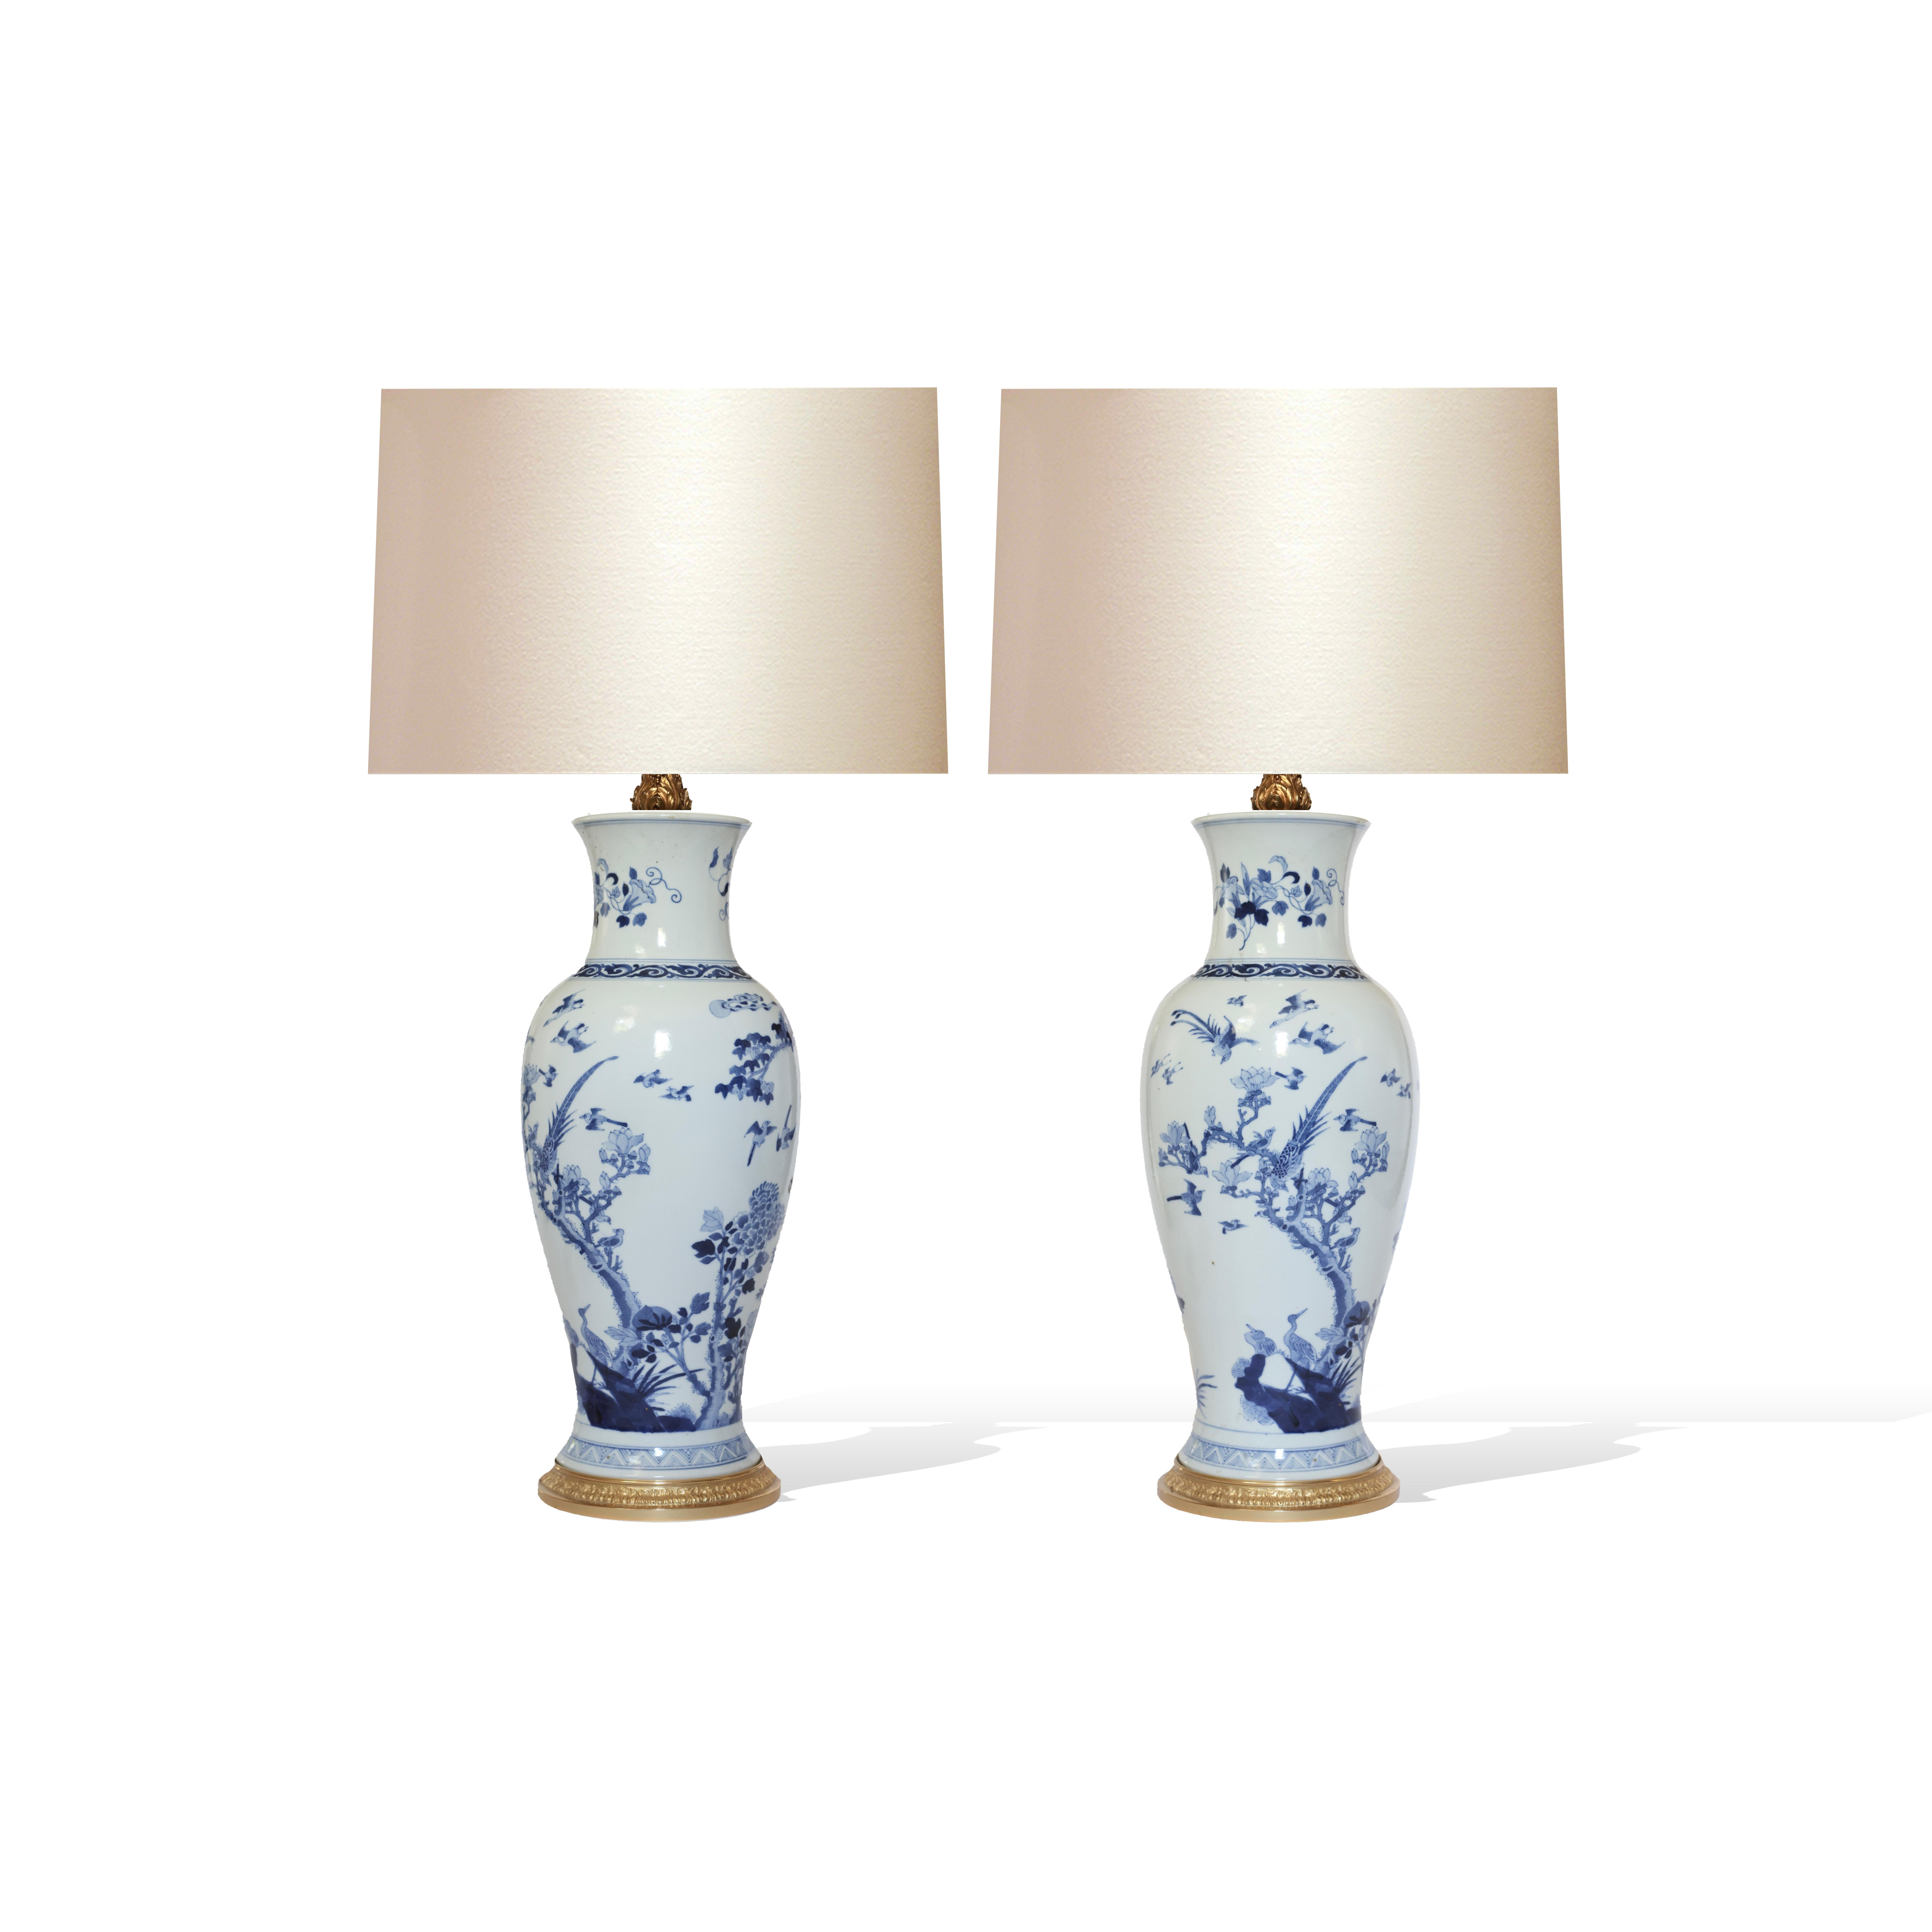 Pair of Blue and White Porcelain Lamps  1